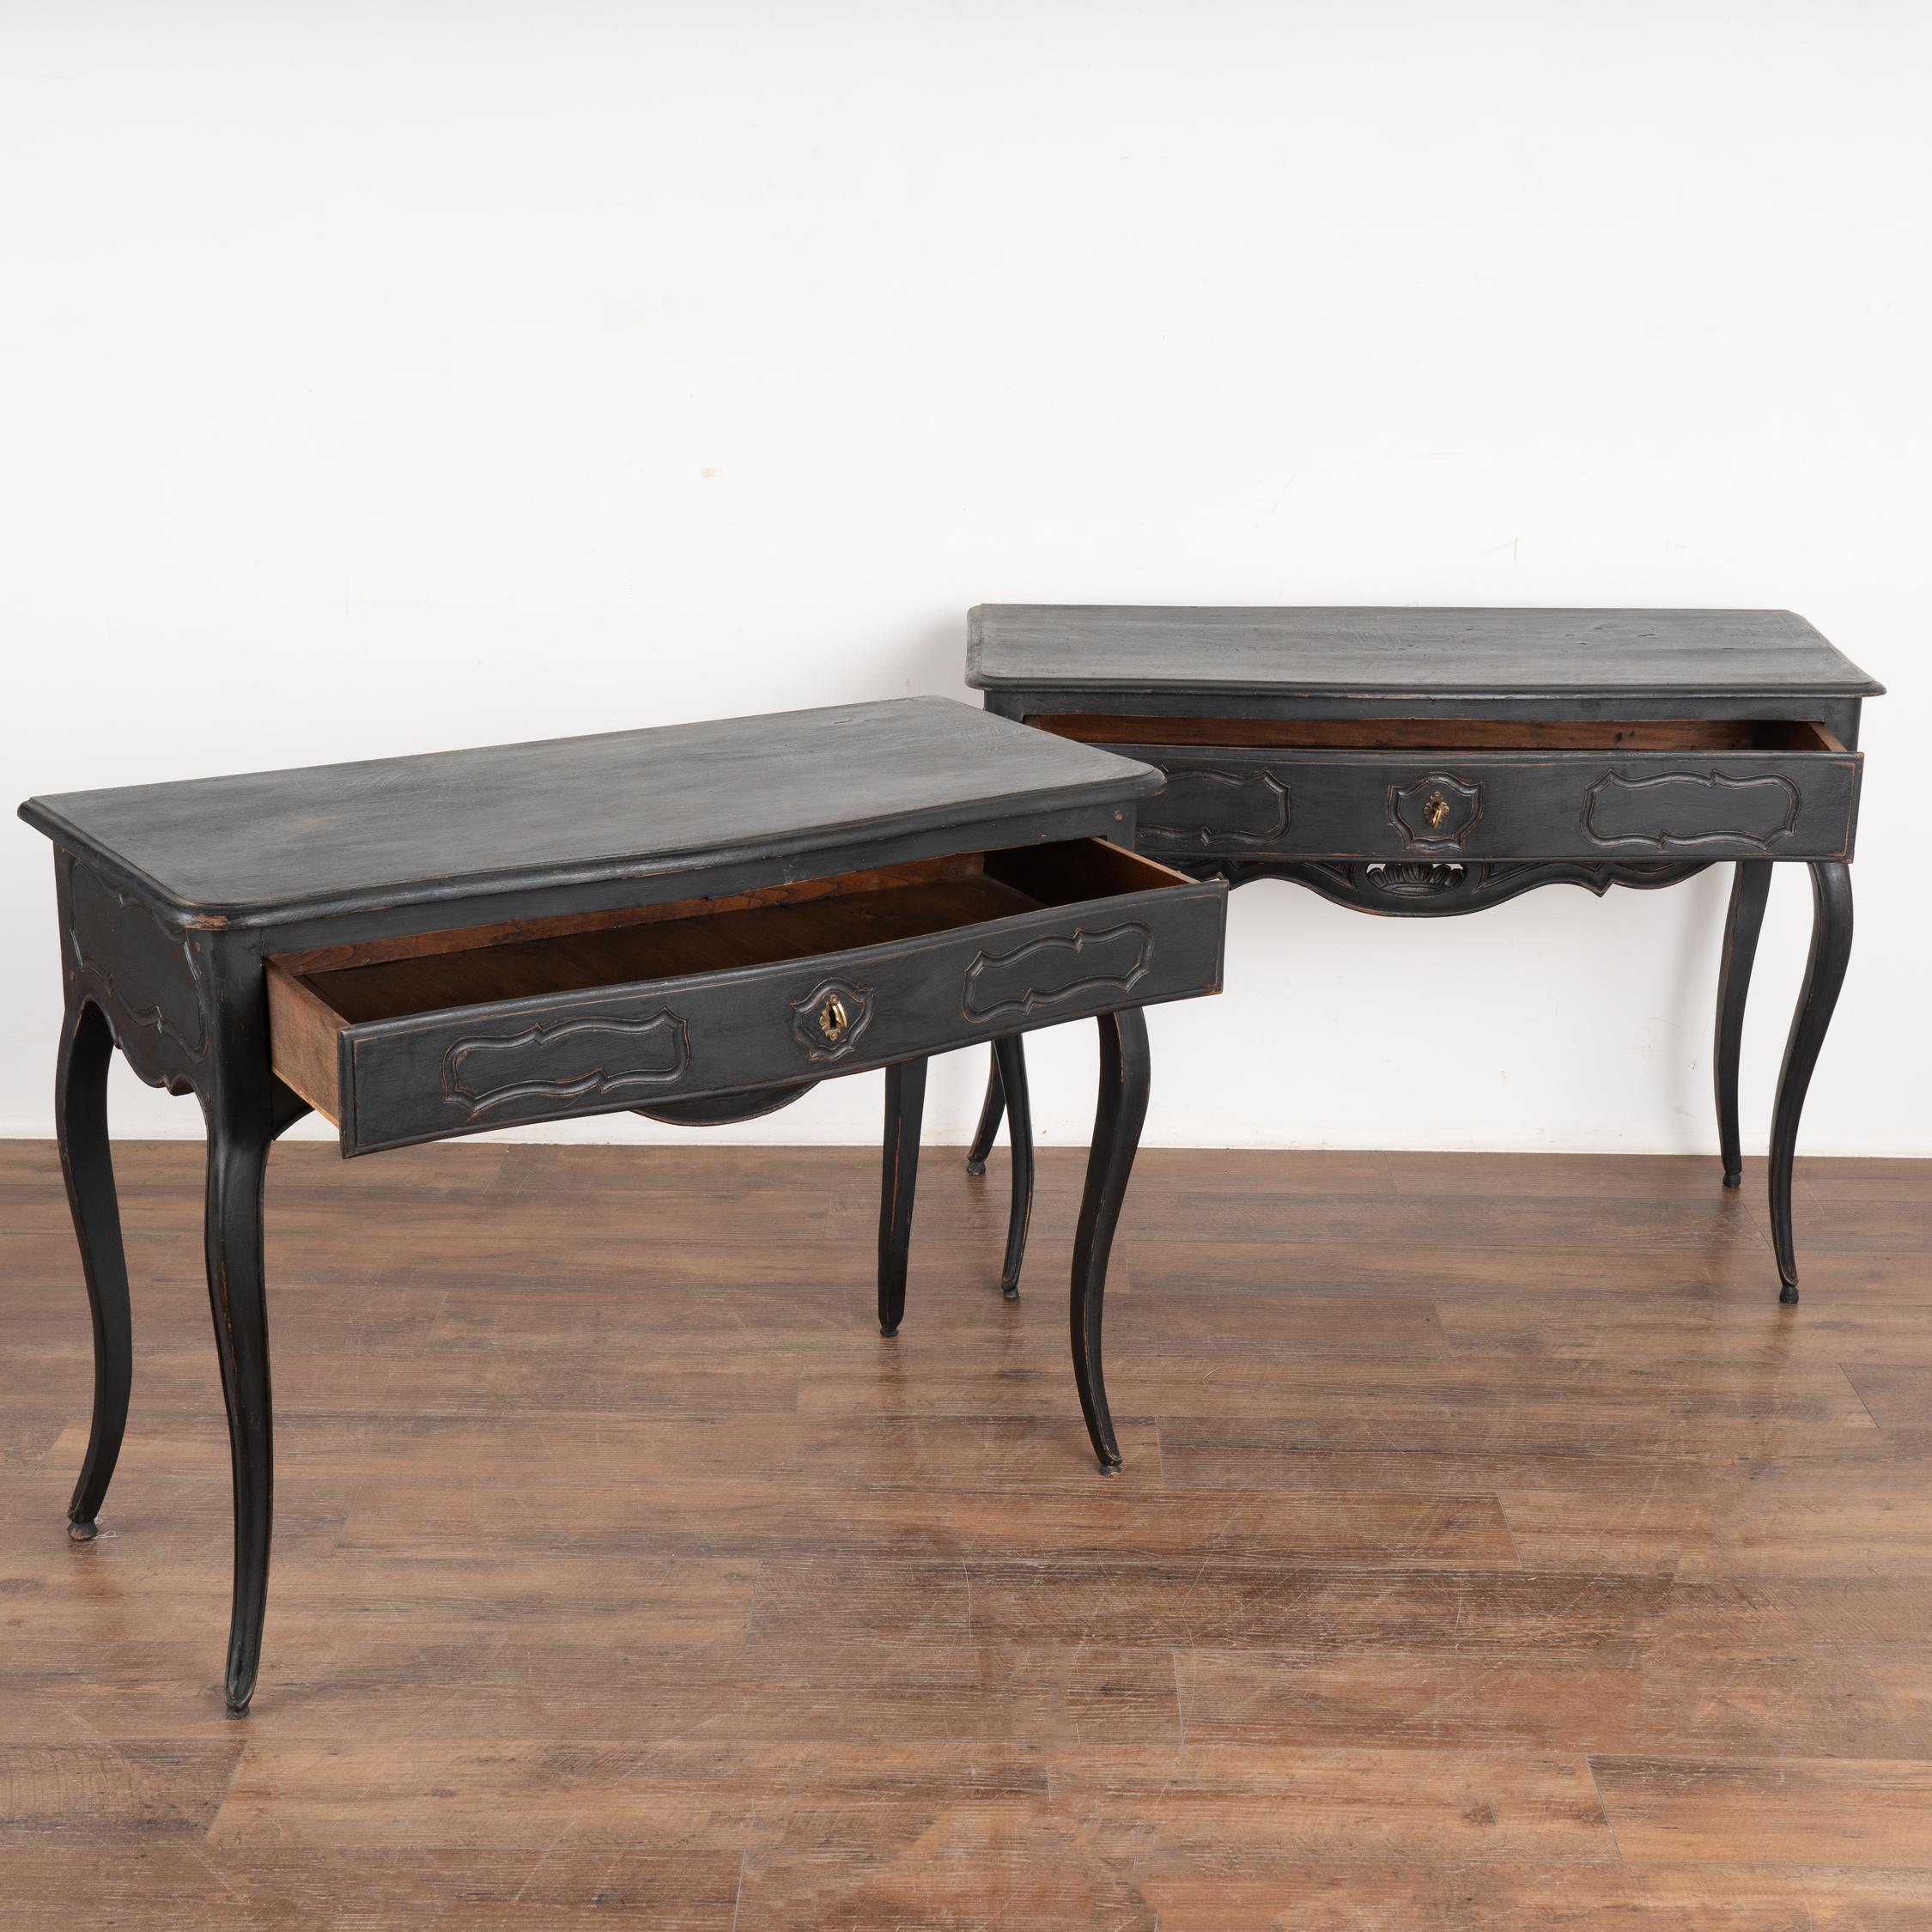 French Provincial Pair, Black Carved Side Tables With Cabriolet Legs, France circa 1850-70